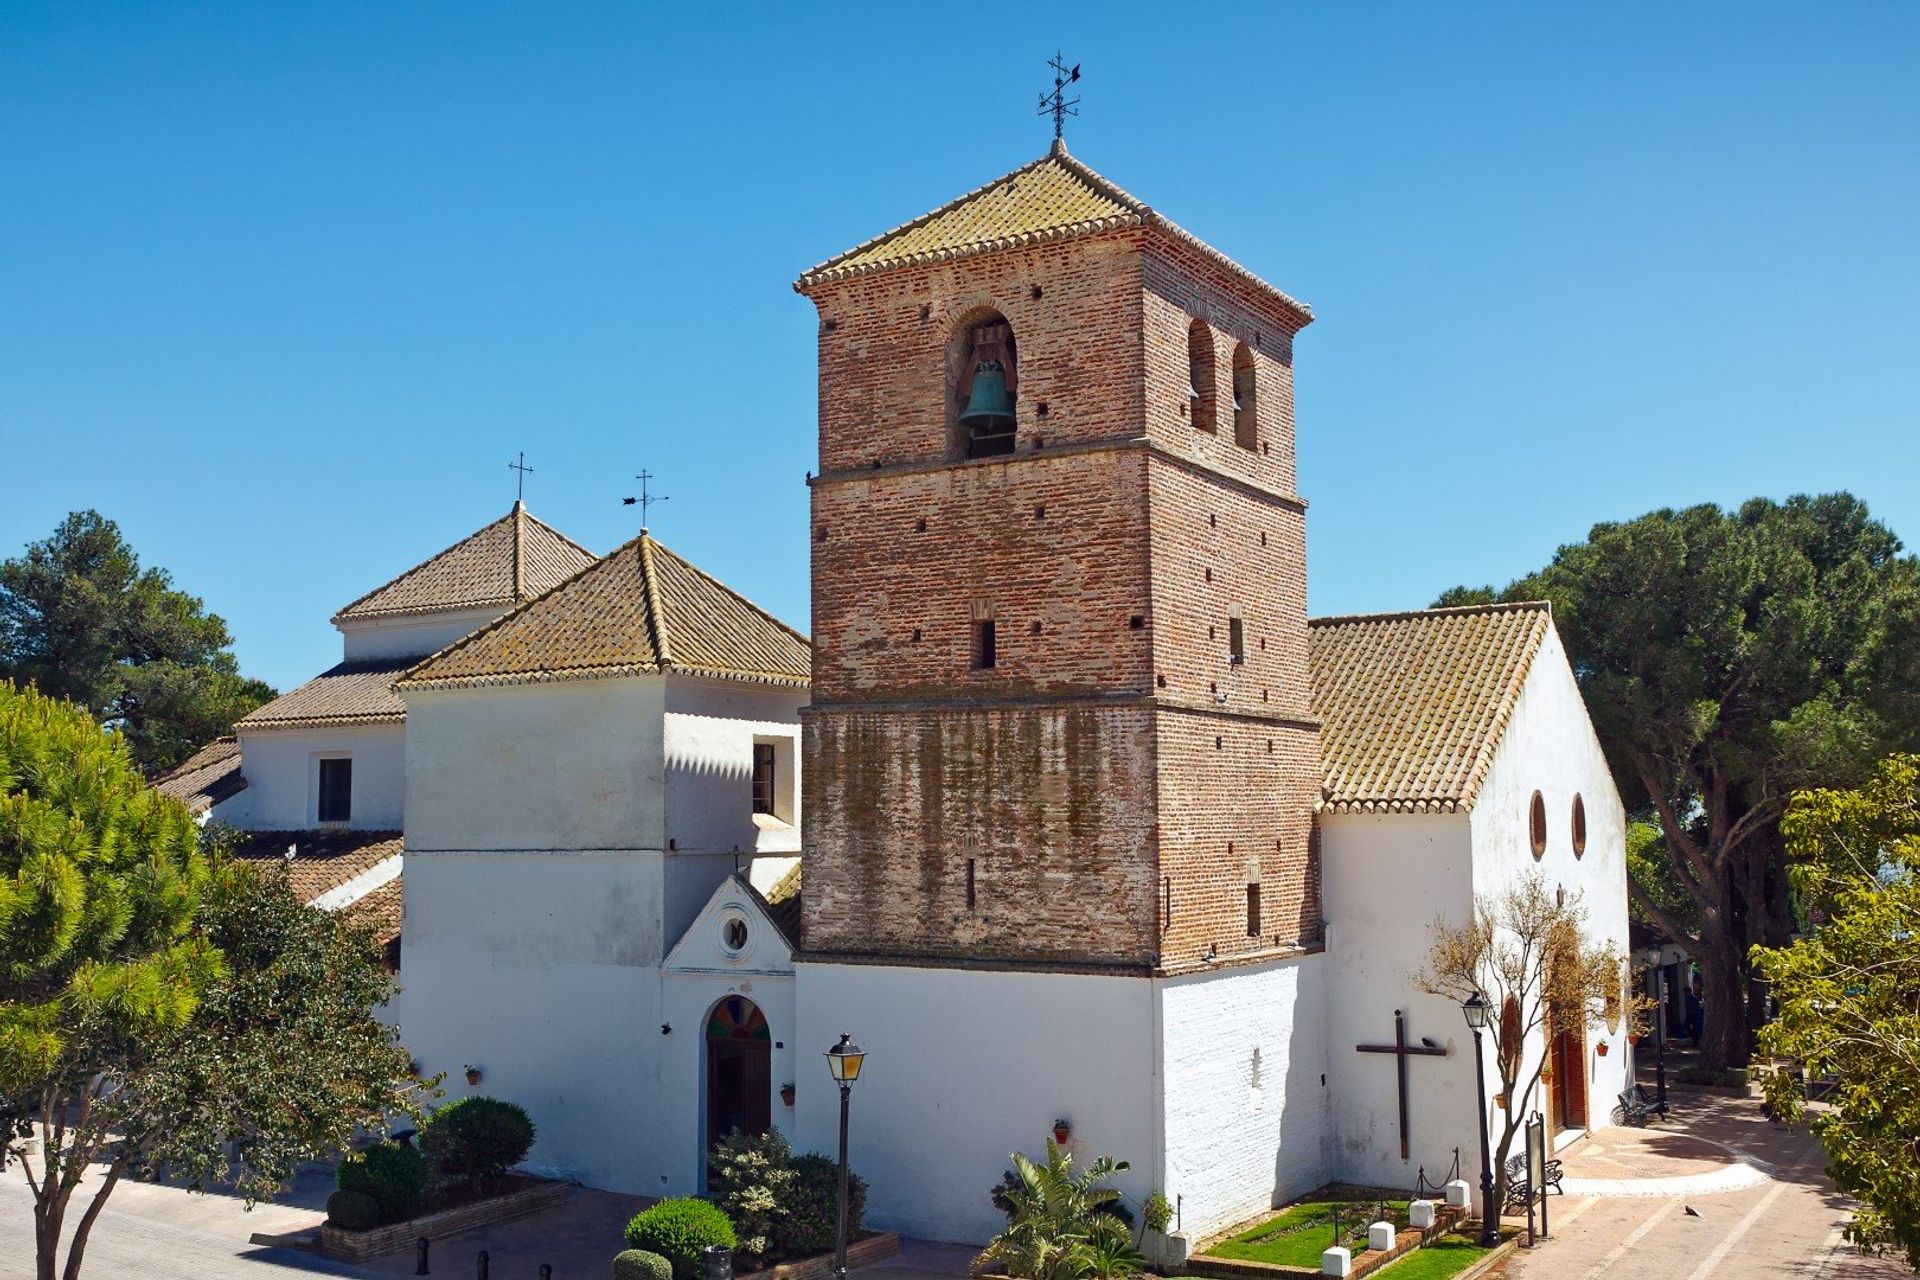 The 17th Century Church of the Immaculate Conception with the original tower bells in the heart of Mijas Town